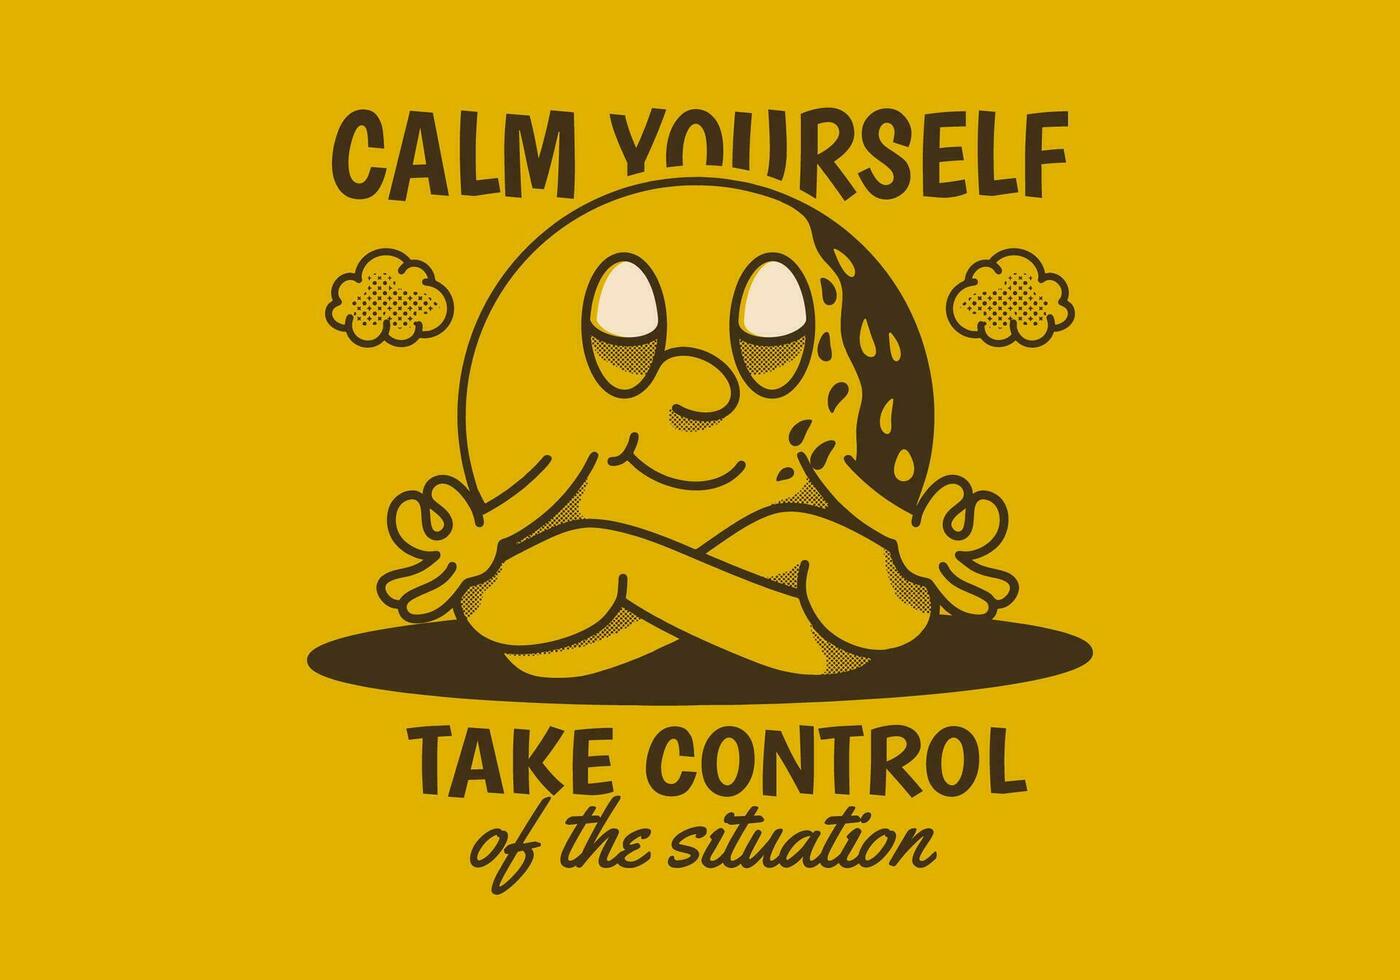 Calm yourself, take control of the situation. Mascot character of golf ball in meditation pose vector